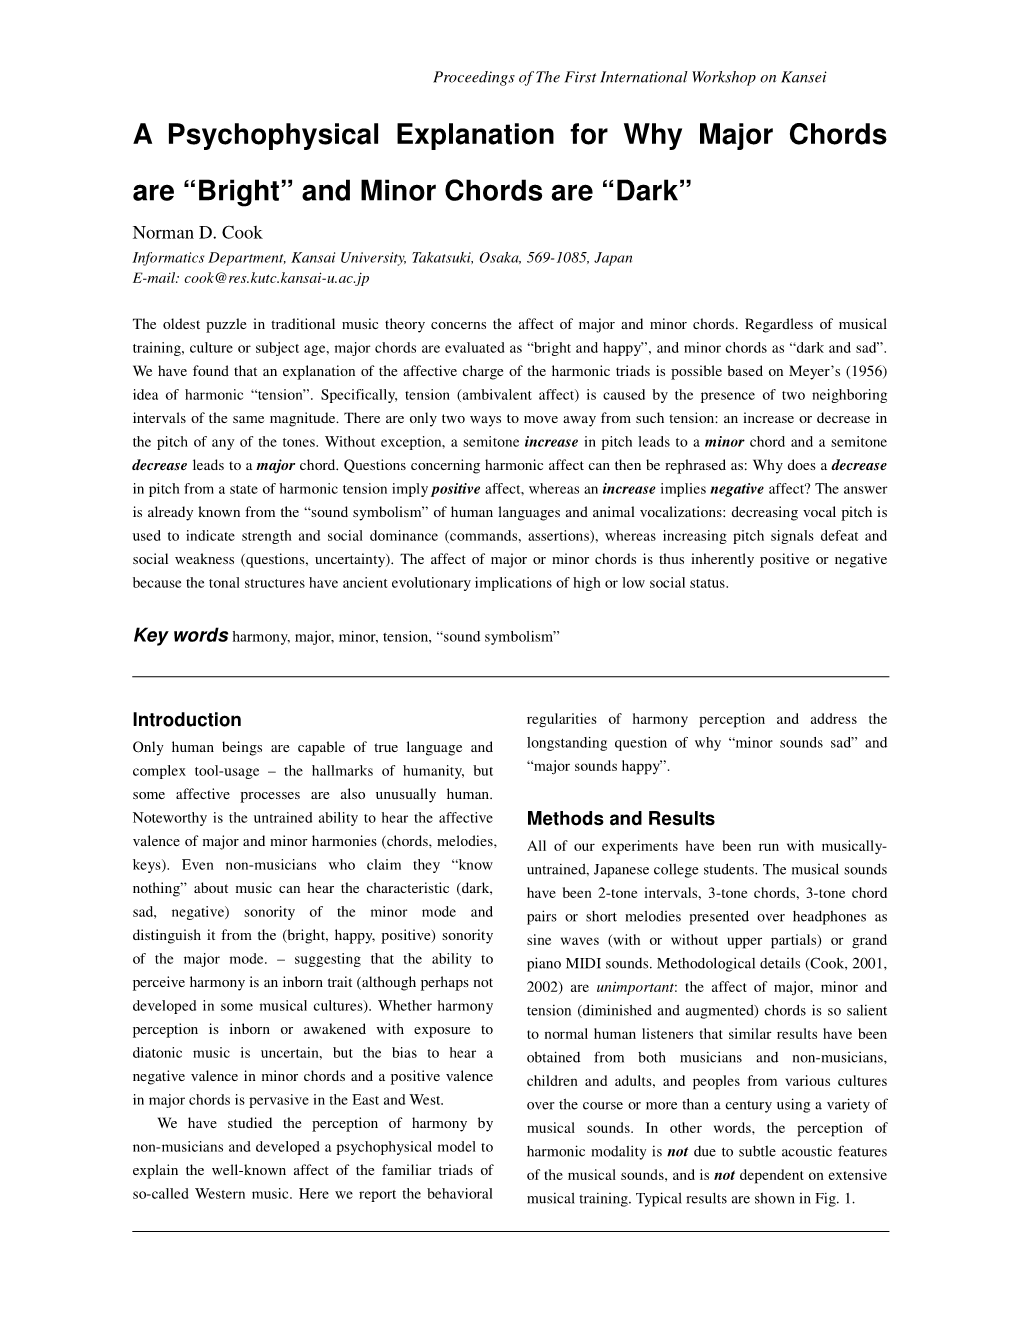 A Psychophysical Explanation for Why Major Chords Are “Bright” and Minor Chords Are “Dark”